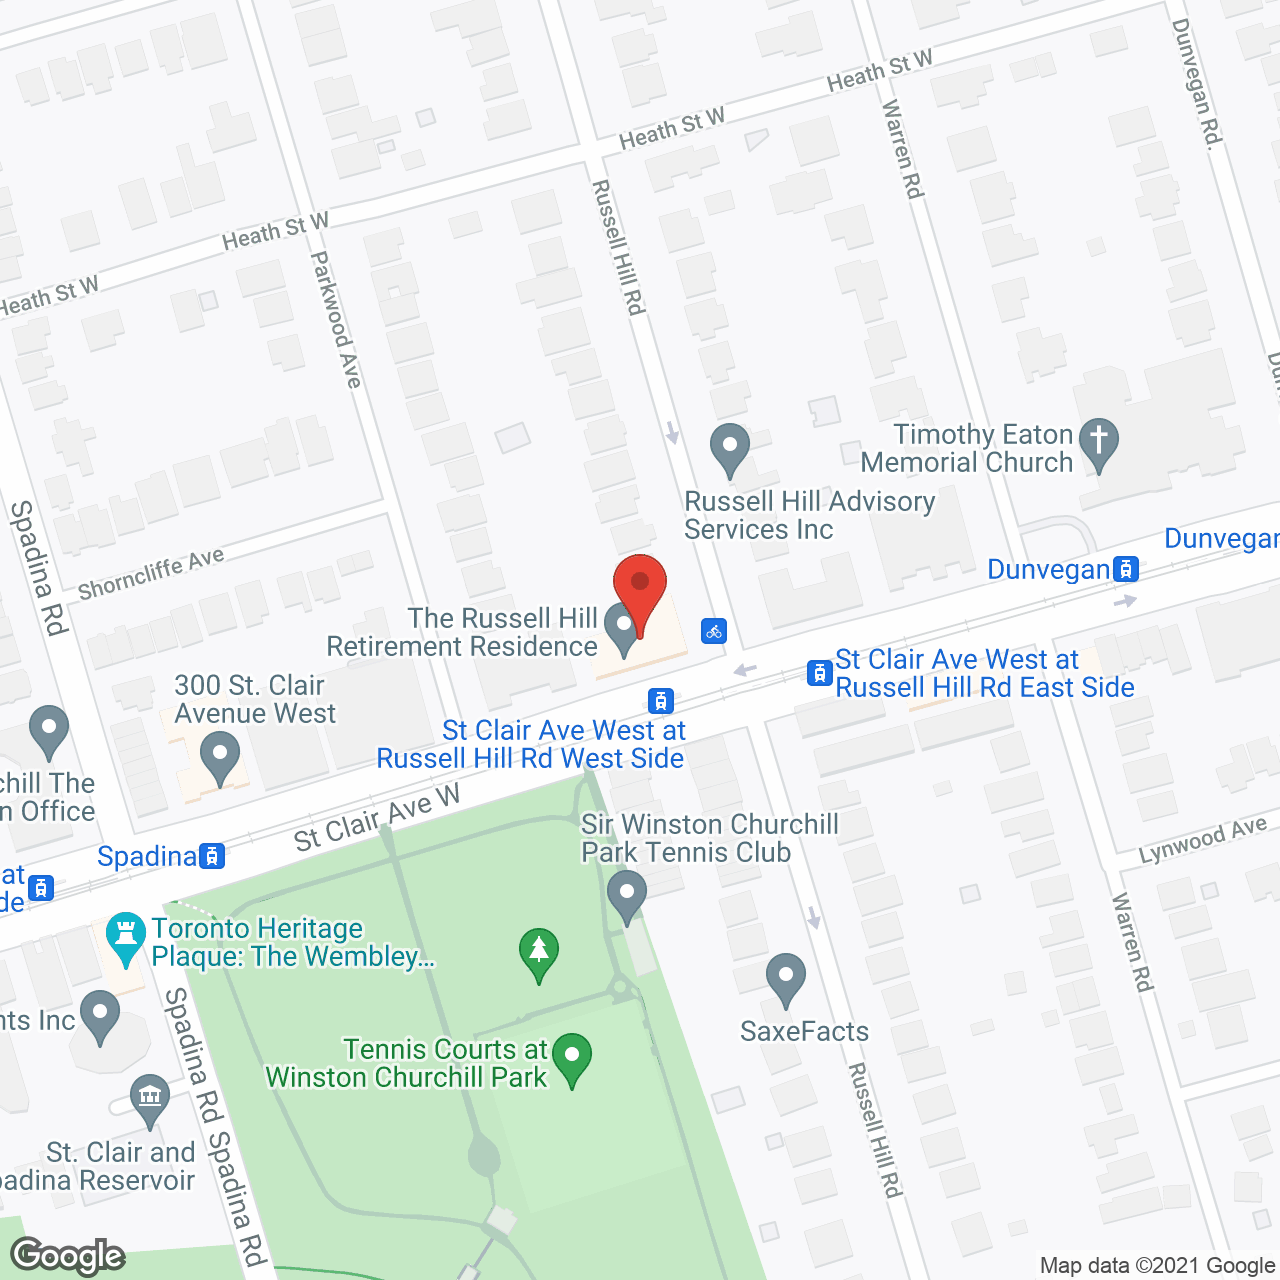 The Russell Hill Retirement Residence in google map